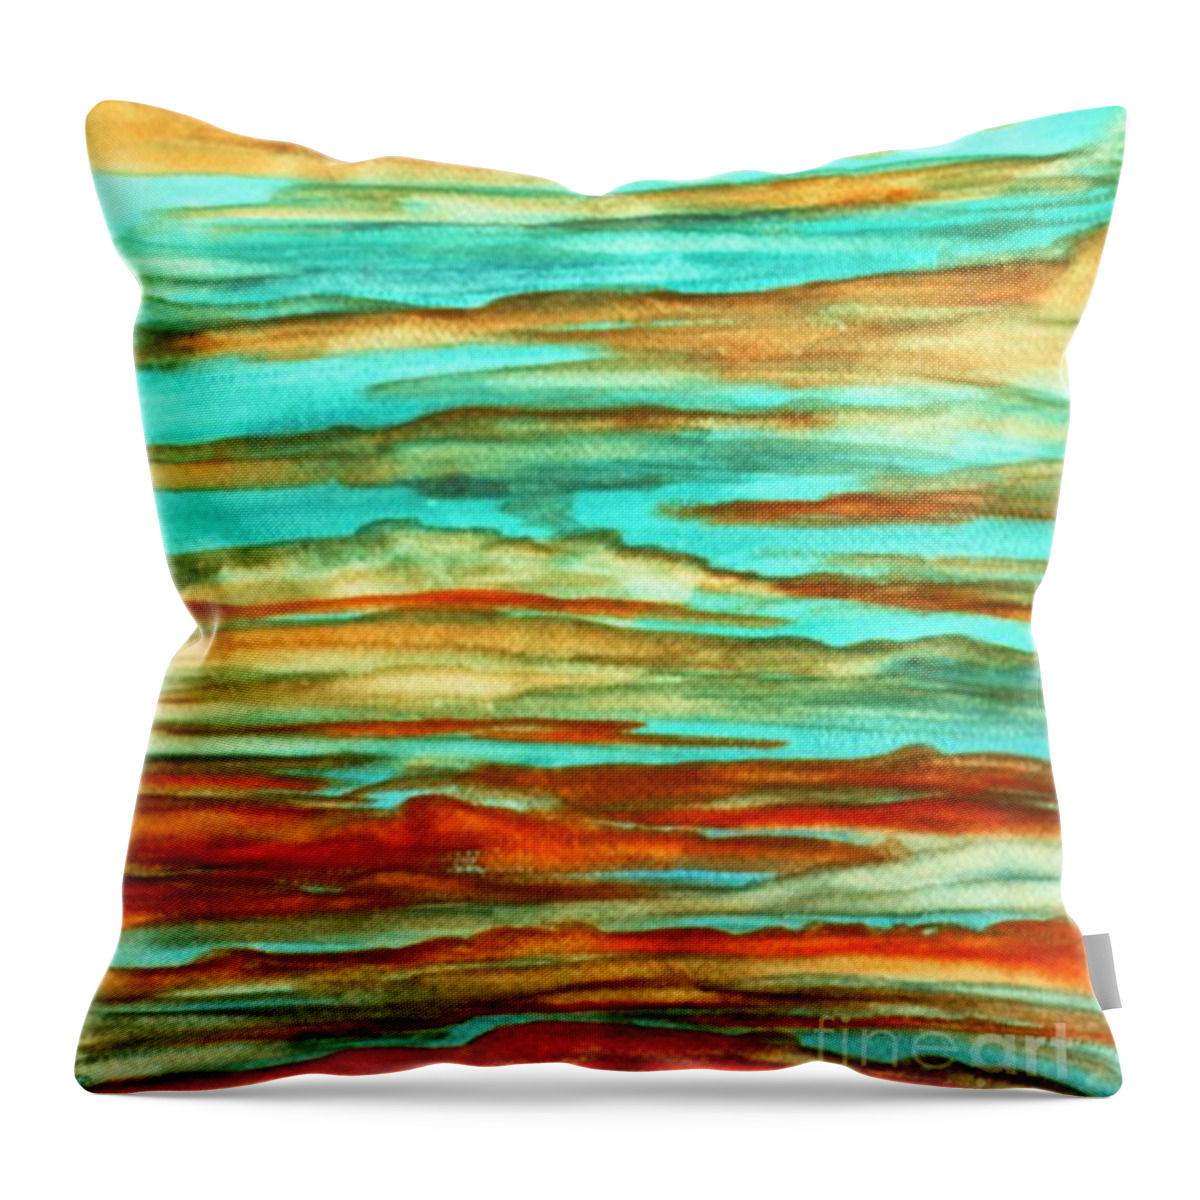 Barbara Throw Pillow featuring the painting Tiger Sky by Barbara Donovan